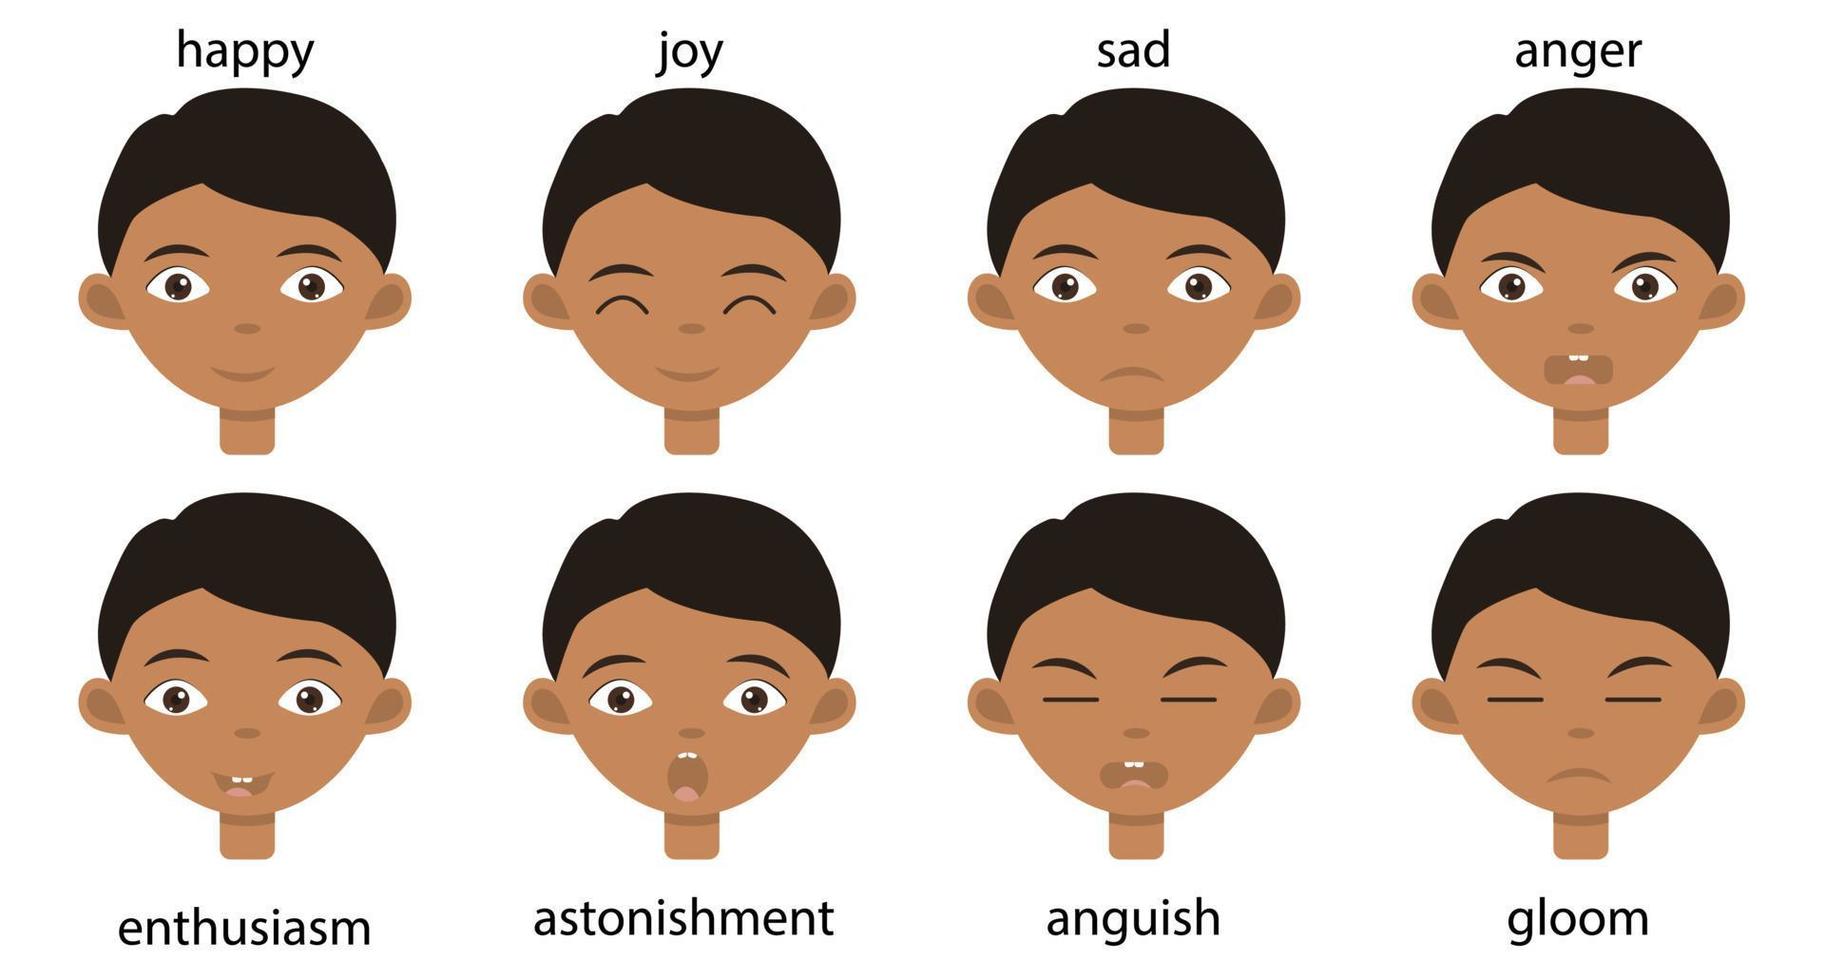 Collection of different happy and sad emotions on a indian toddler face for avatar or stickers. Cute boy portrait with brown eyes. vector